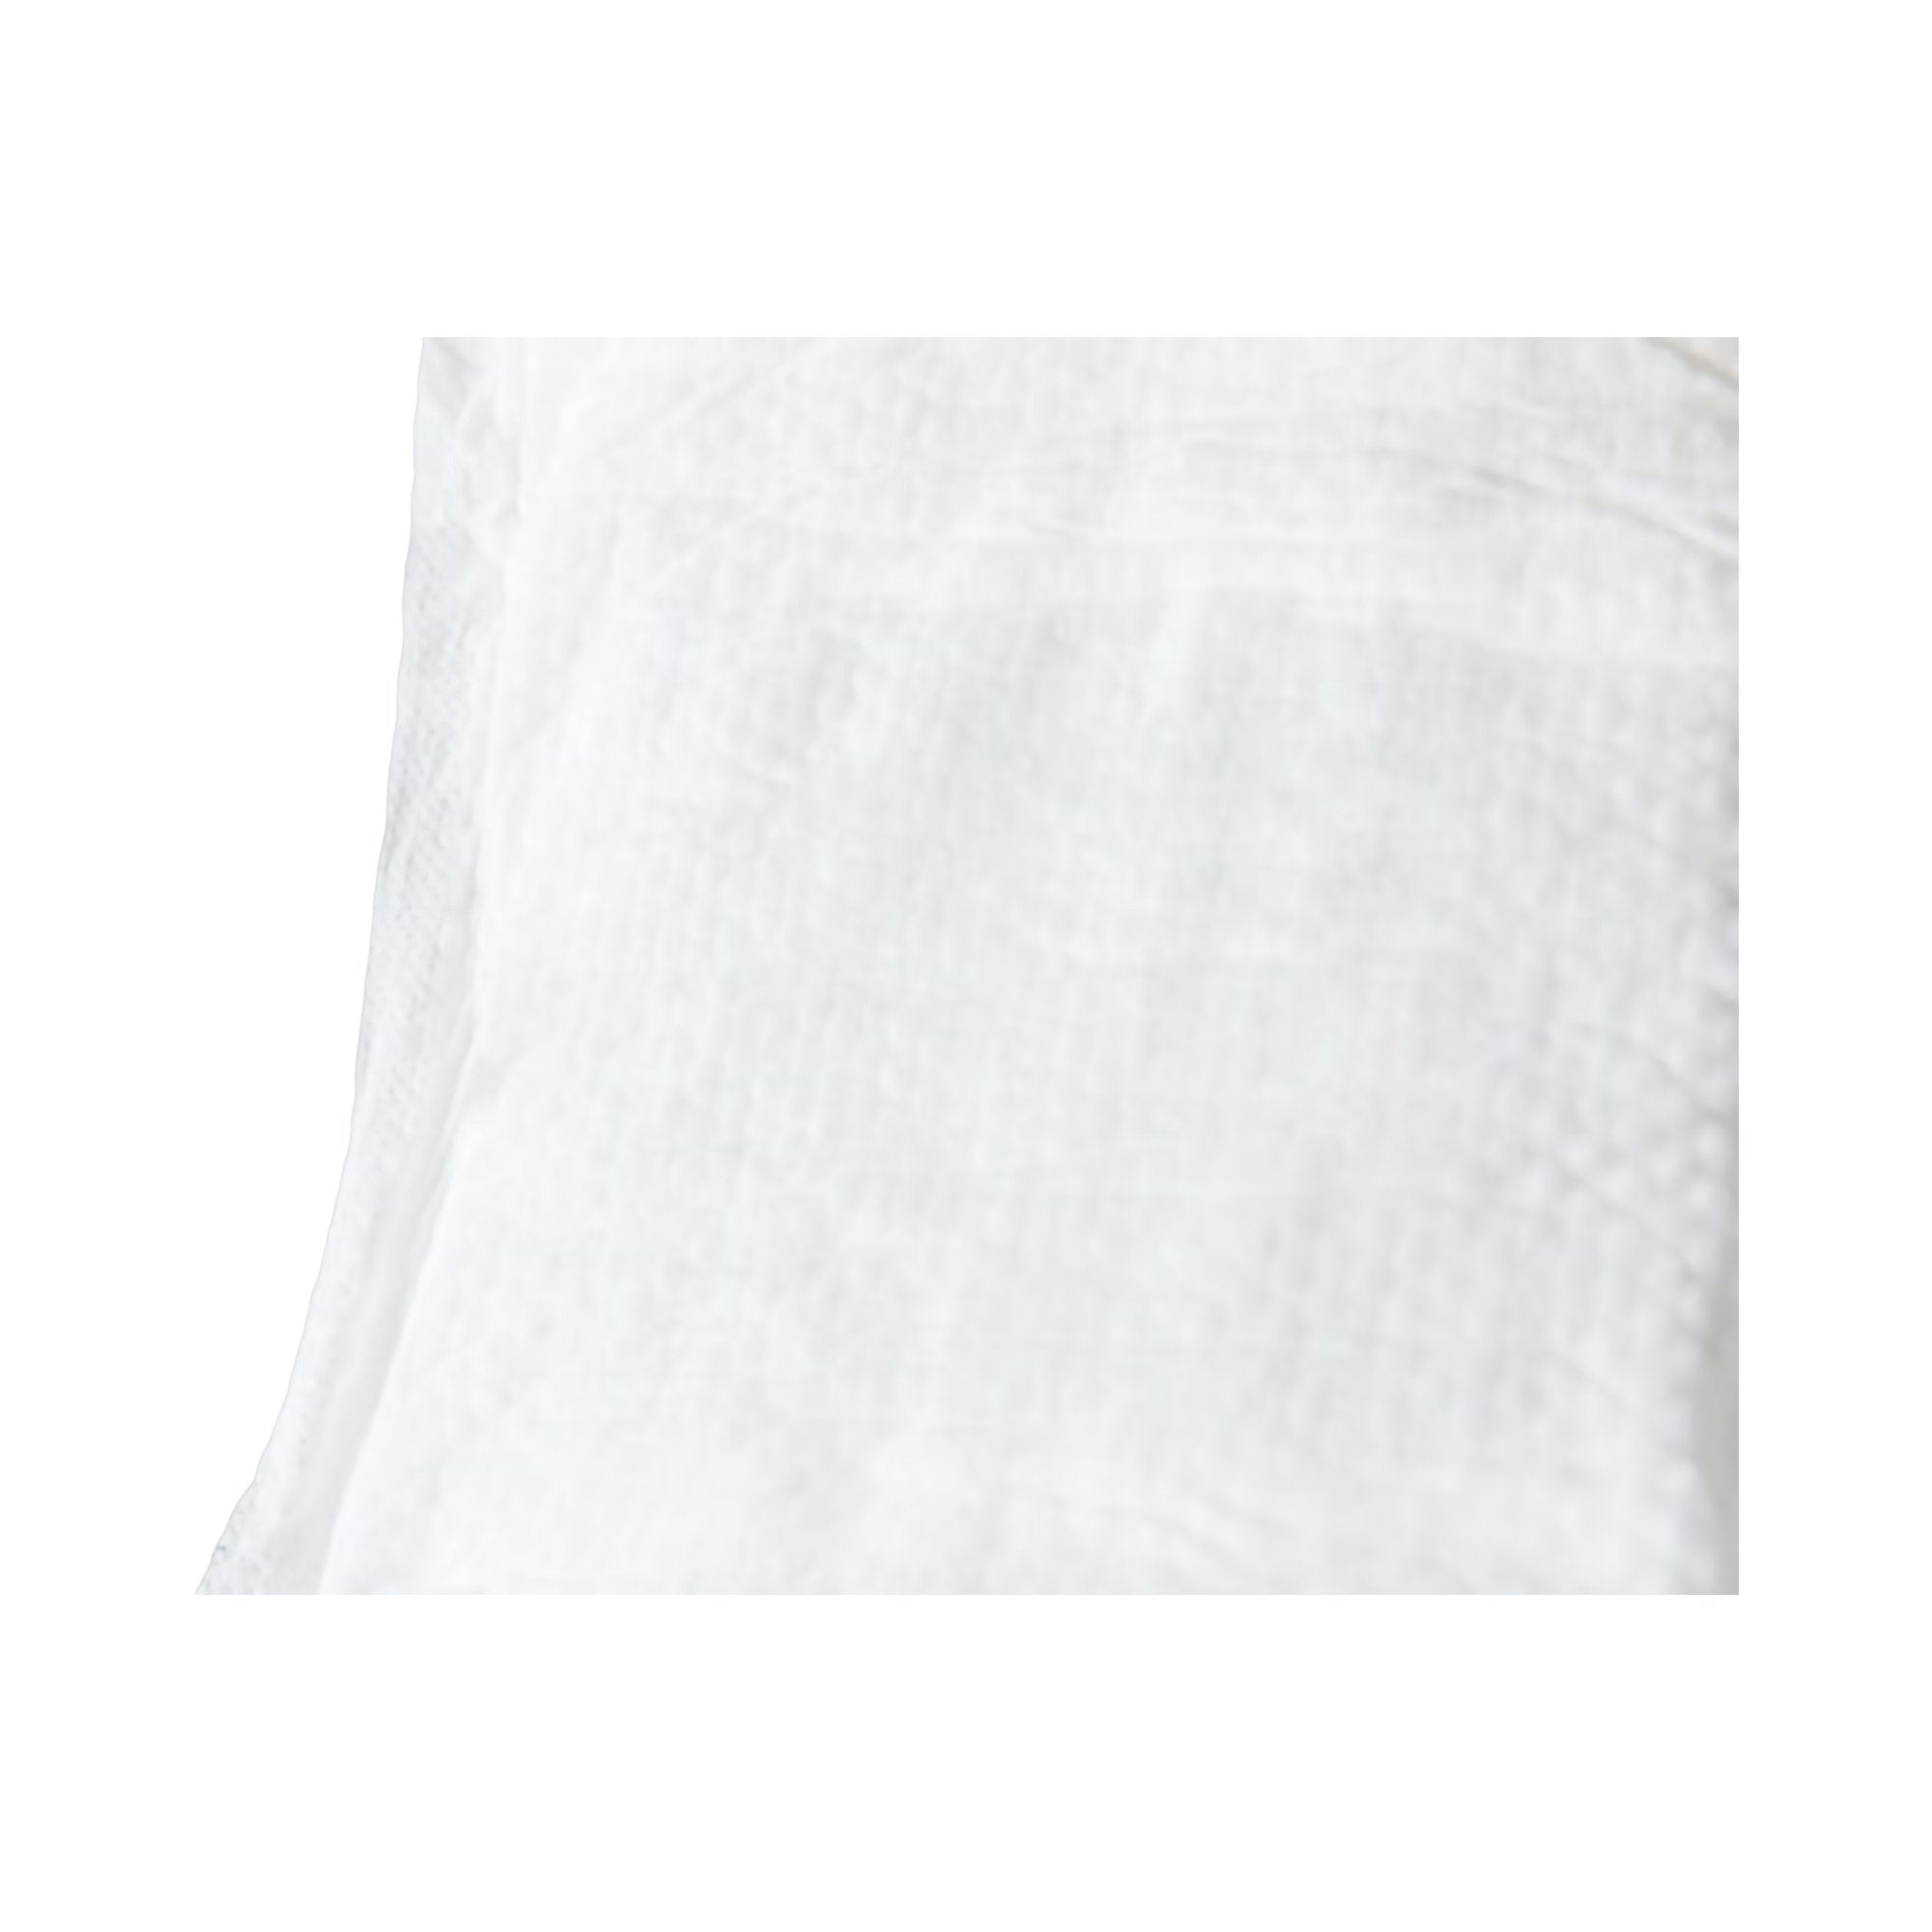 Booster Pad TotalDry™ Ultimate Boost Ups 16-1/2 Inch Length Moderate Absorbency Polymer Core One Size Fits Most